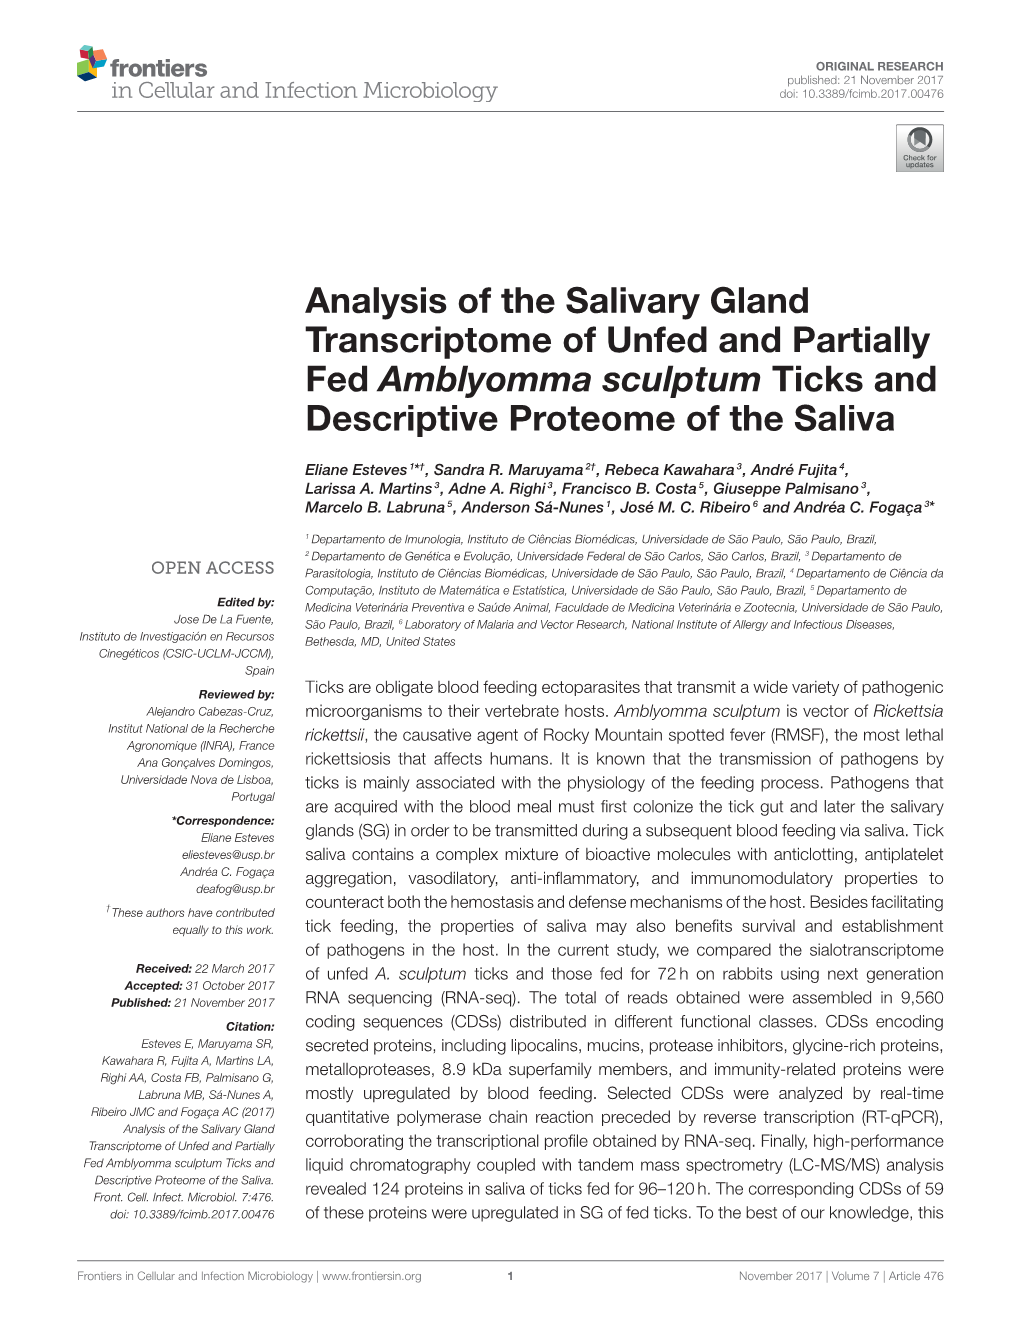 Analysis of the Salivary Gland Transcriptome of Unfed and Partially Fed Amblyomma Sculptum Ticks and Descriptive Proteome of the Saliva